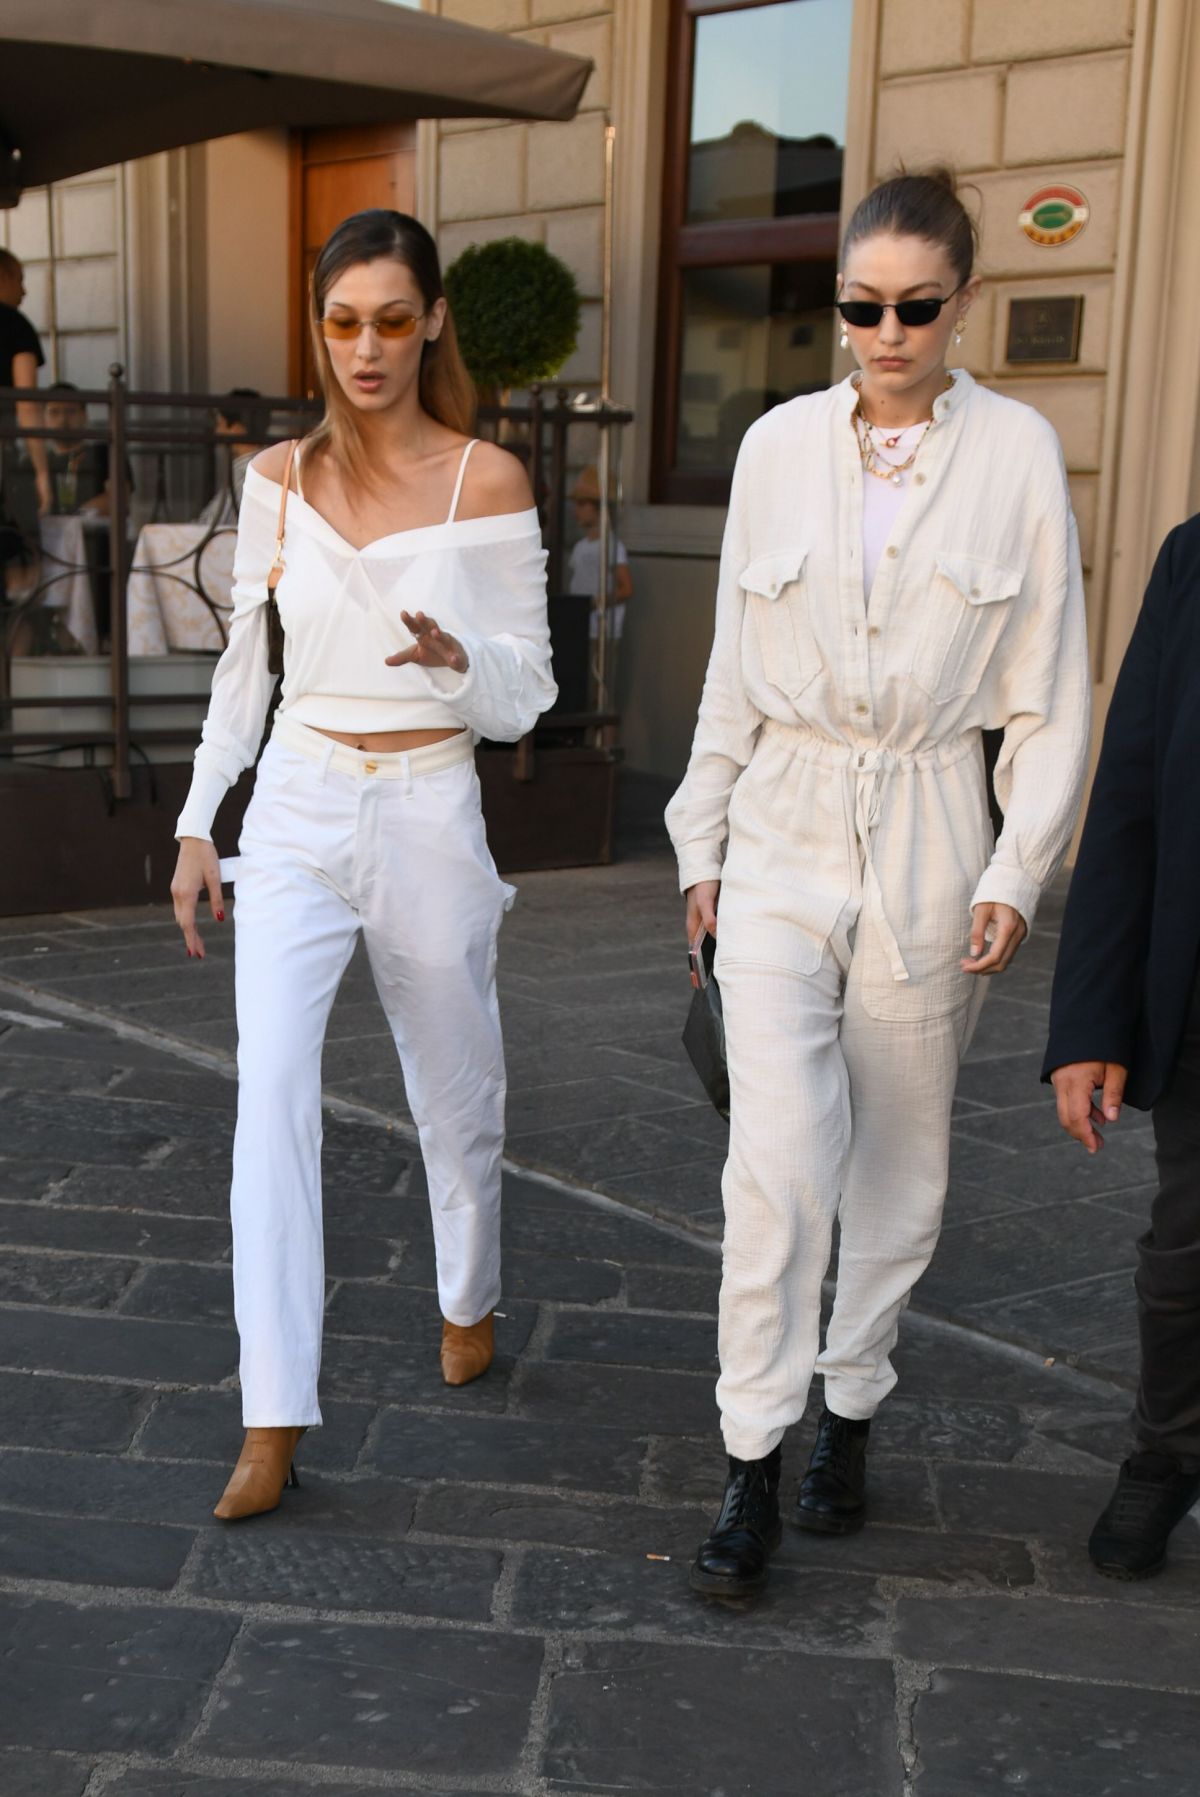 bella-and-gigi-hadid-out-for-diiner-in-florence-06-12-2019-2.jpg